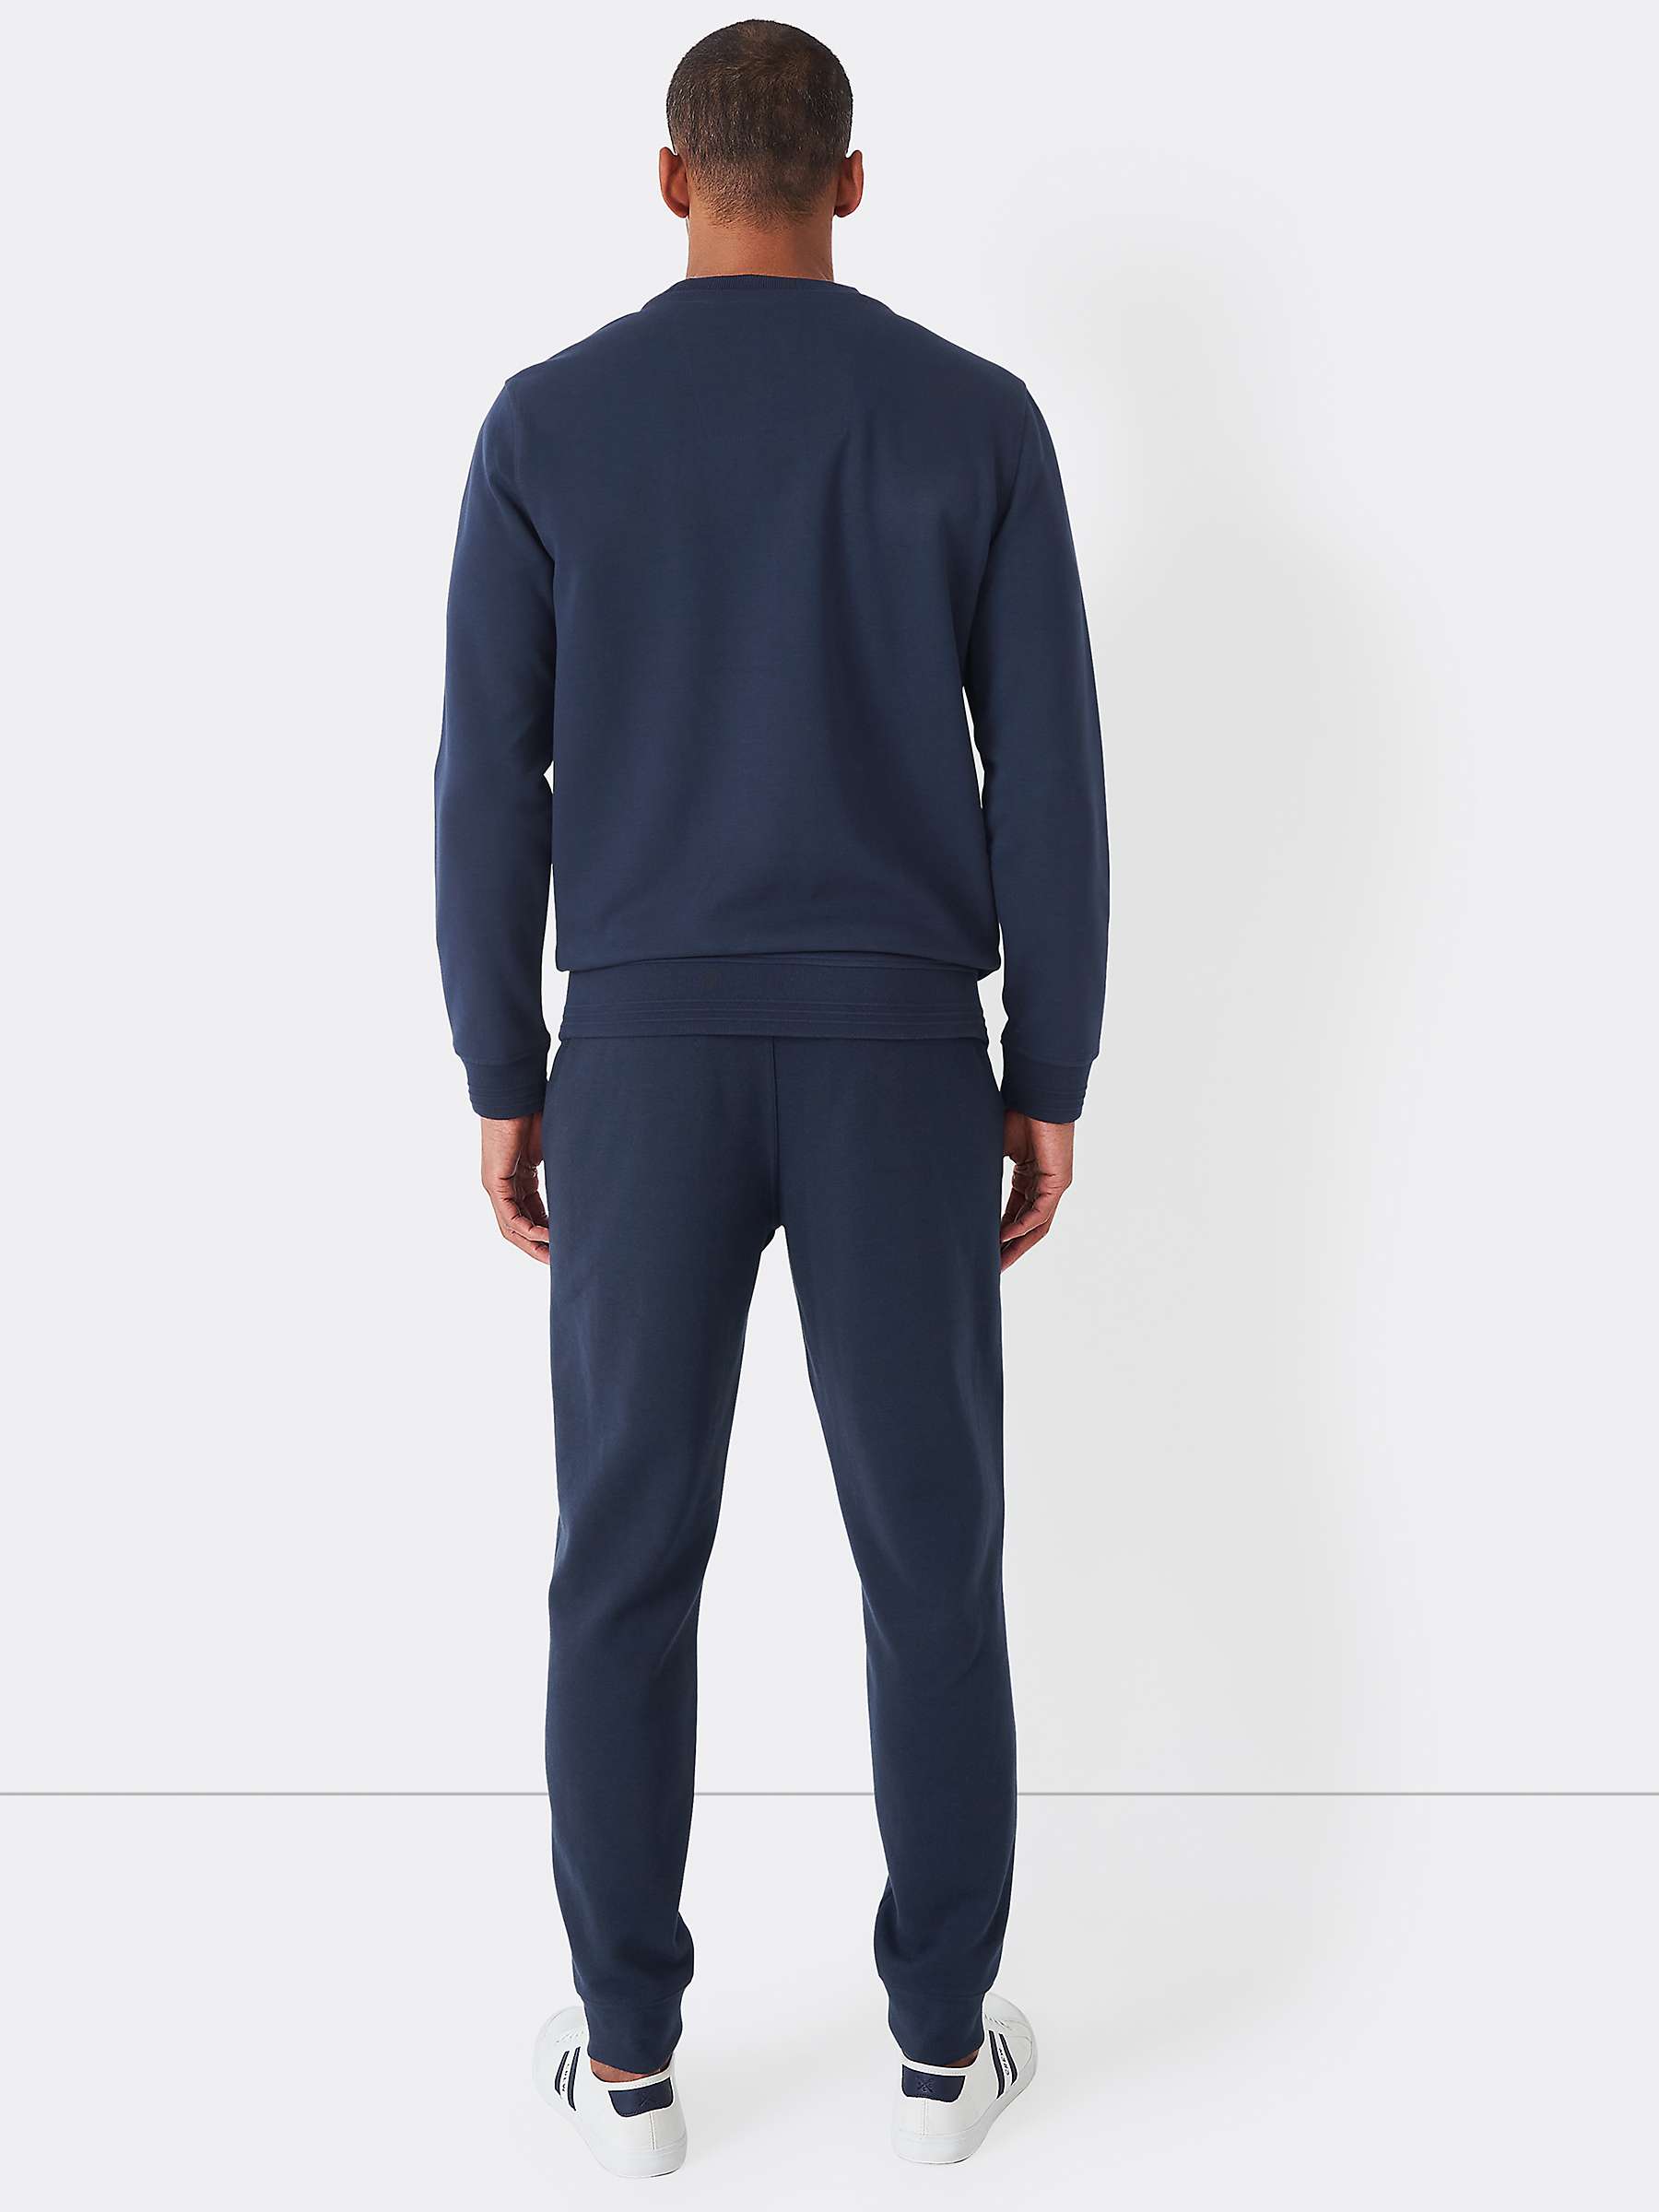 Crew Clothing Fairford Joggers, Navy at John Lewis & Partners